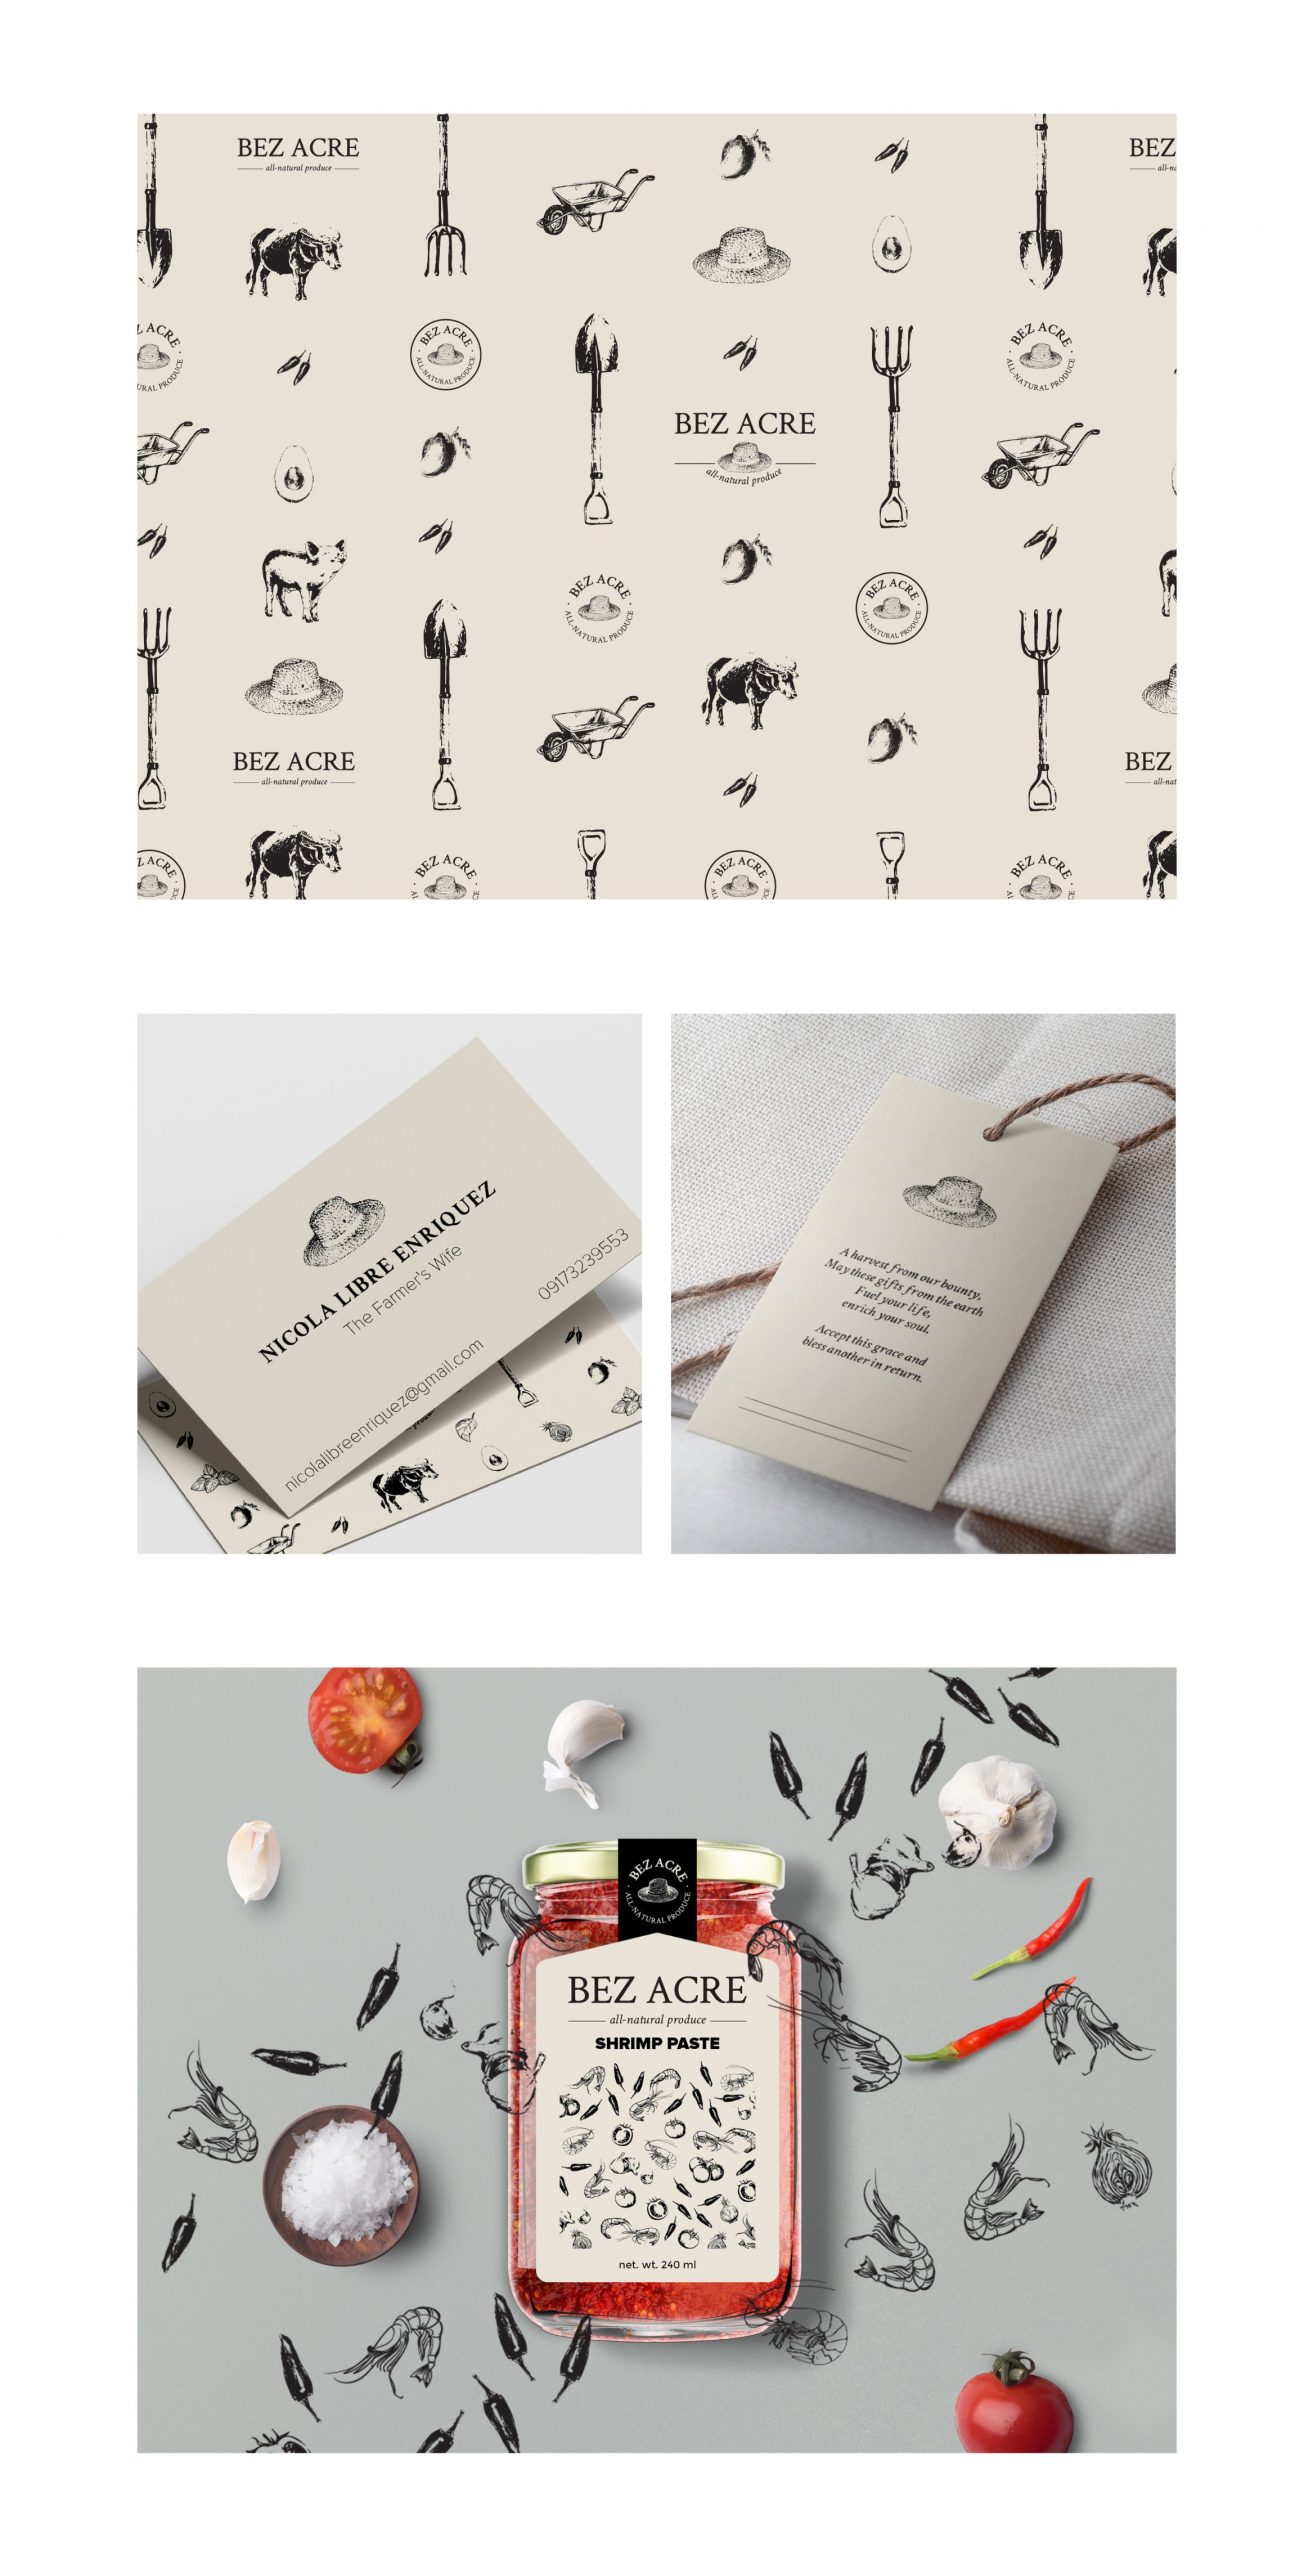 Illustrations of the brand